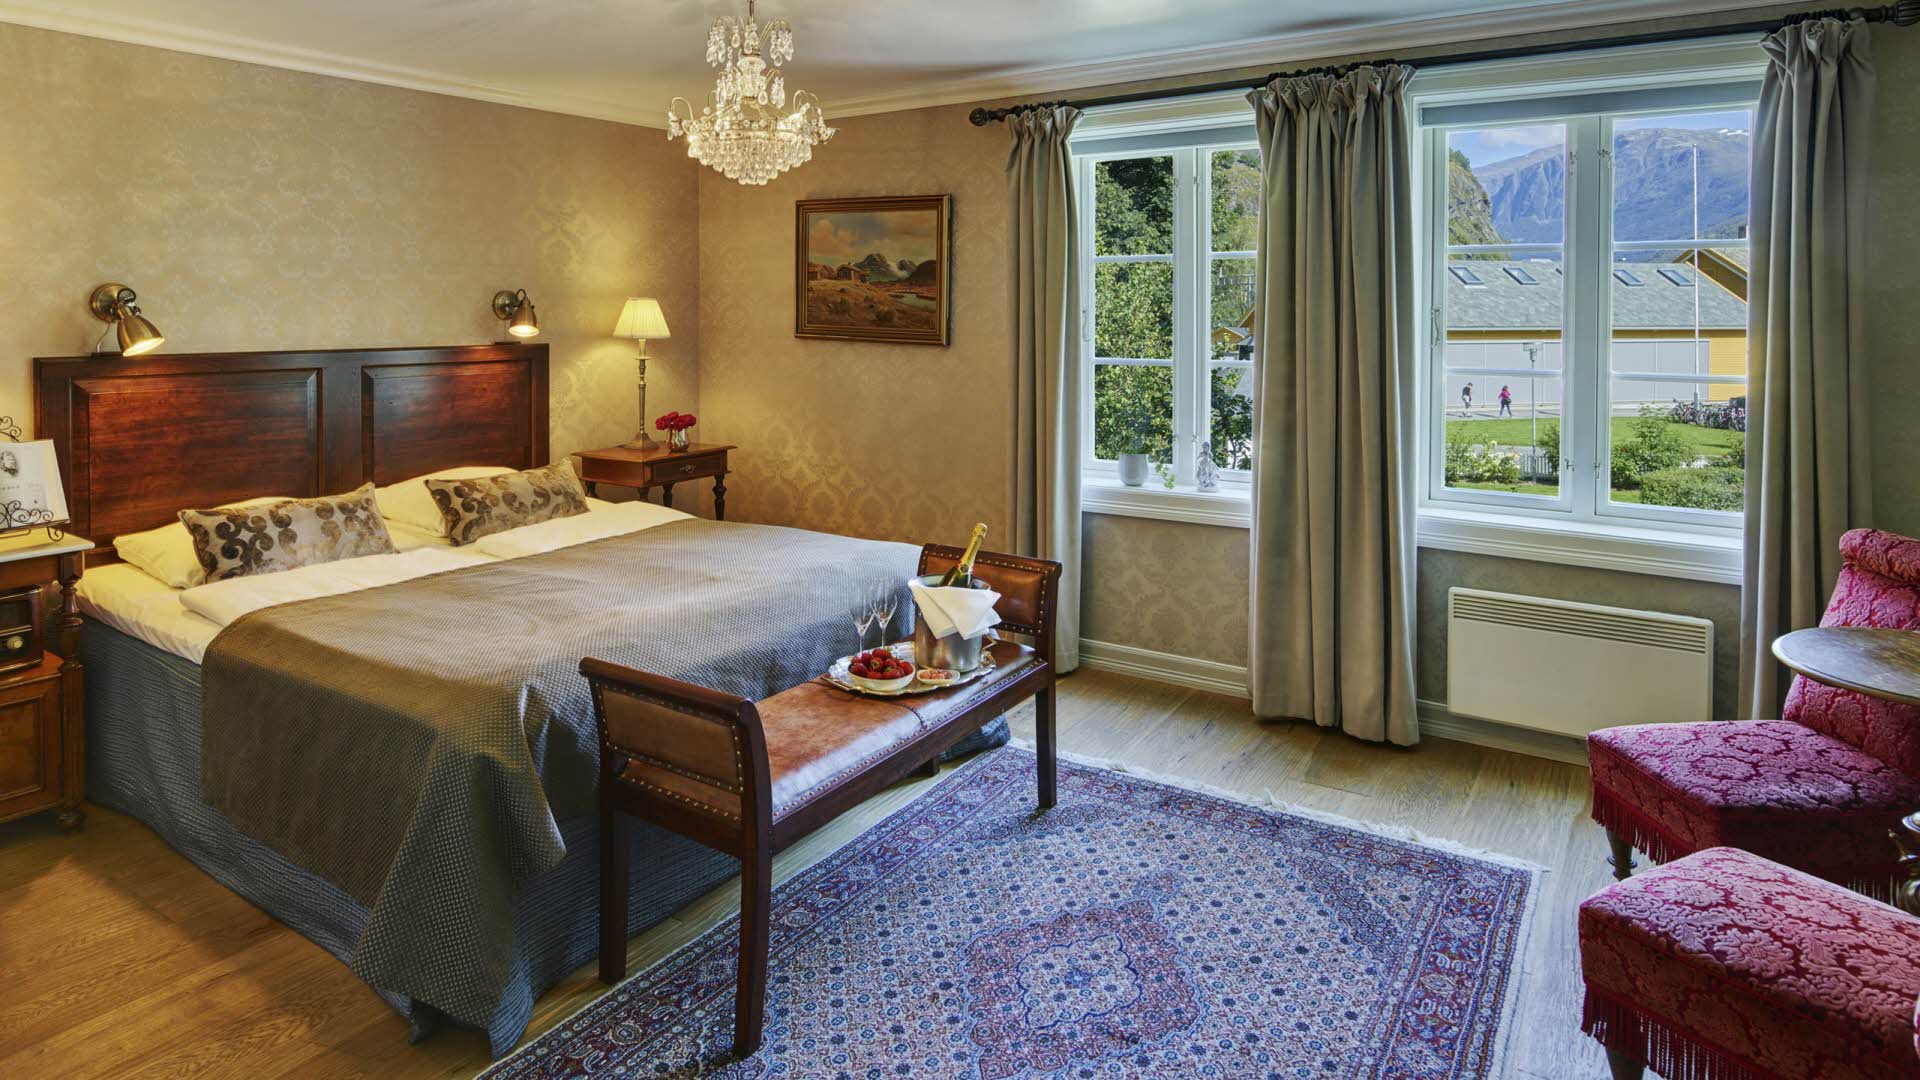 A historic room with vintage furniture, champagne and berries on a bench and windows with views to Flåm